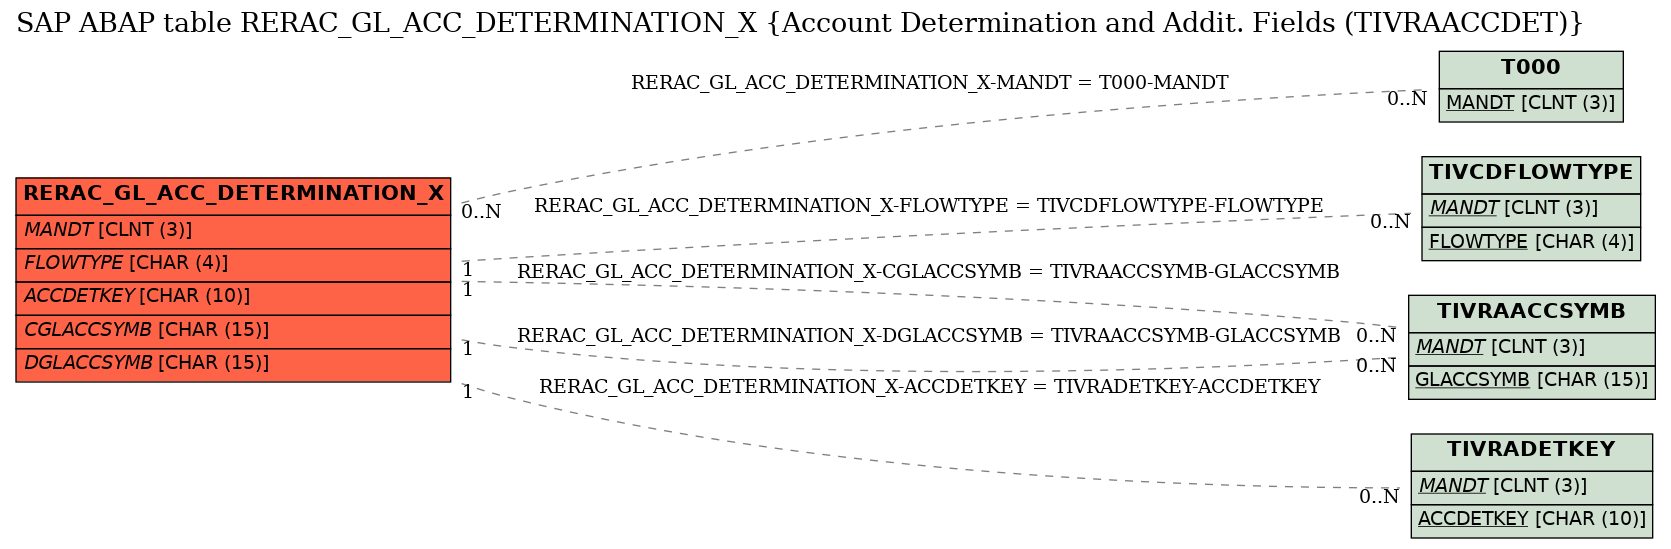 E-R Diagram for table RERAC_GL_ACC_DETERMINATION_X (Account Determination and Addit. Fields (TIVRAACCDET))